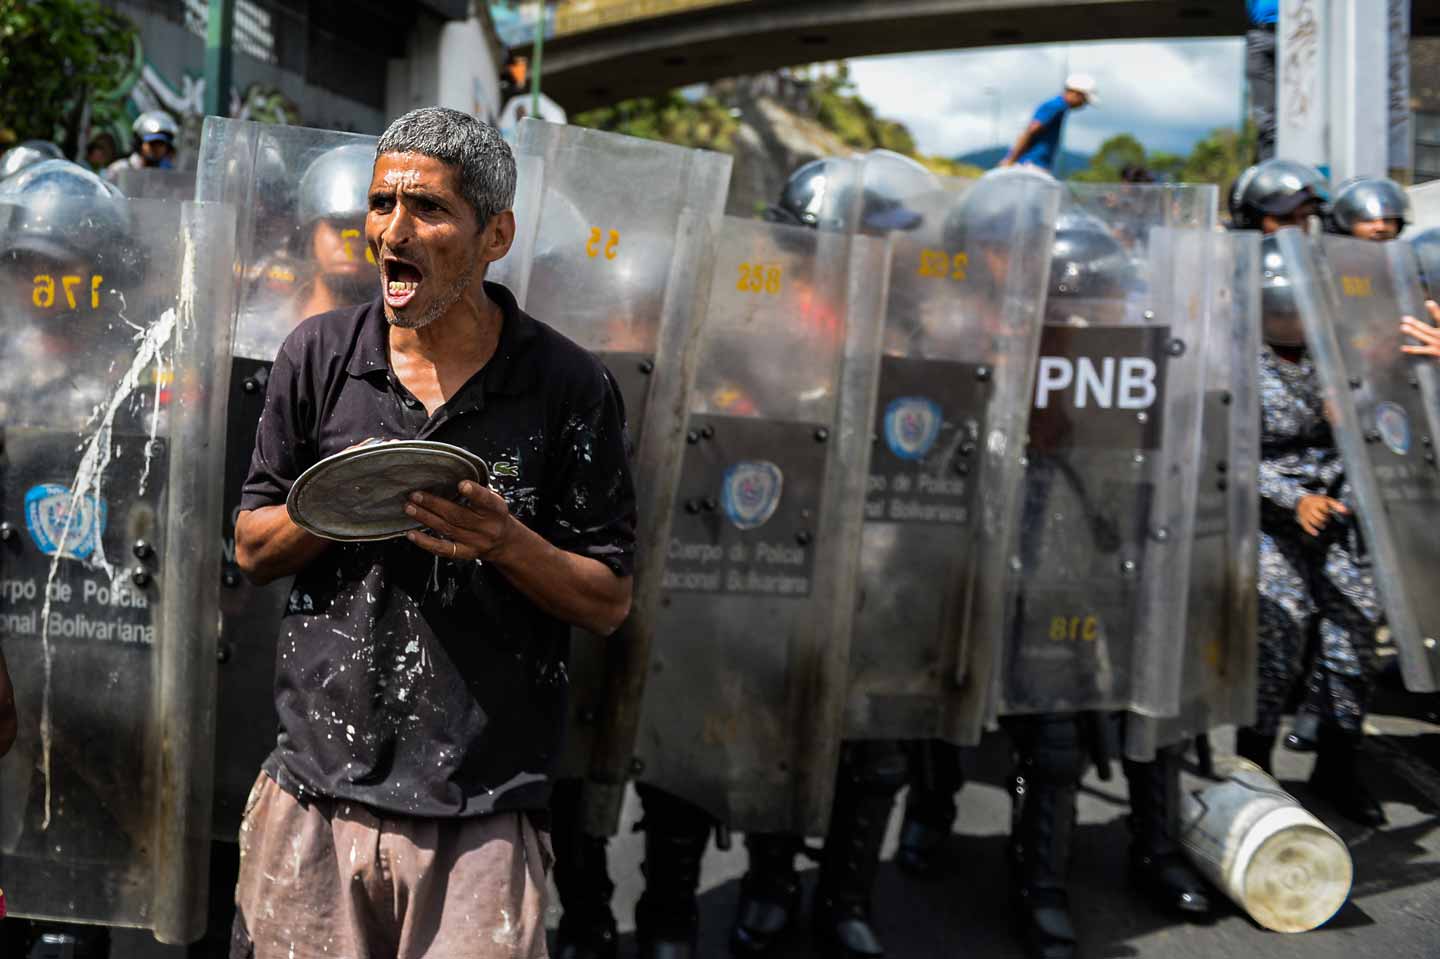 © Federico Parra. People shout slogans during a protest against the shortage of food on Fuerzas Armadas avenue in Caracas on December 28, 2017. As Venezuelans protest in Caracas demanding the government's promised pork-the main dish of the Christmas and New Year's dinner-President Nicolas Maduro attributes the shortage to international sabotage.